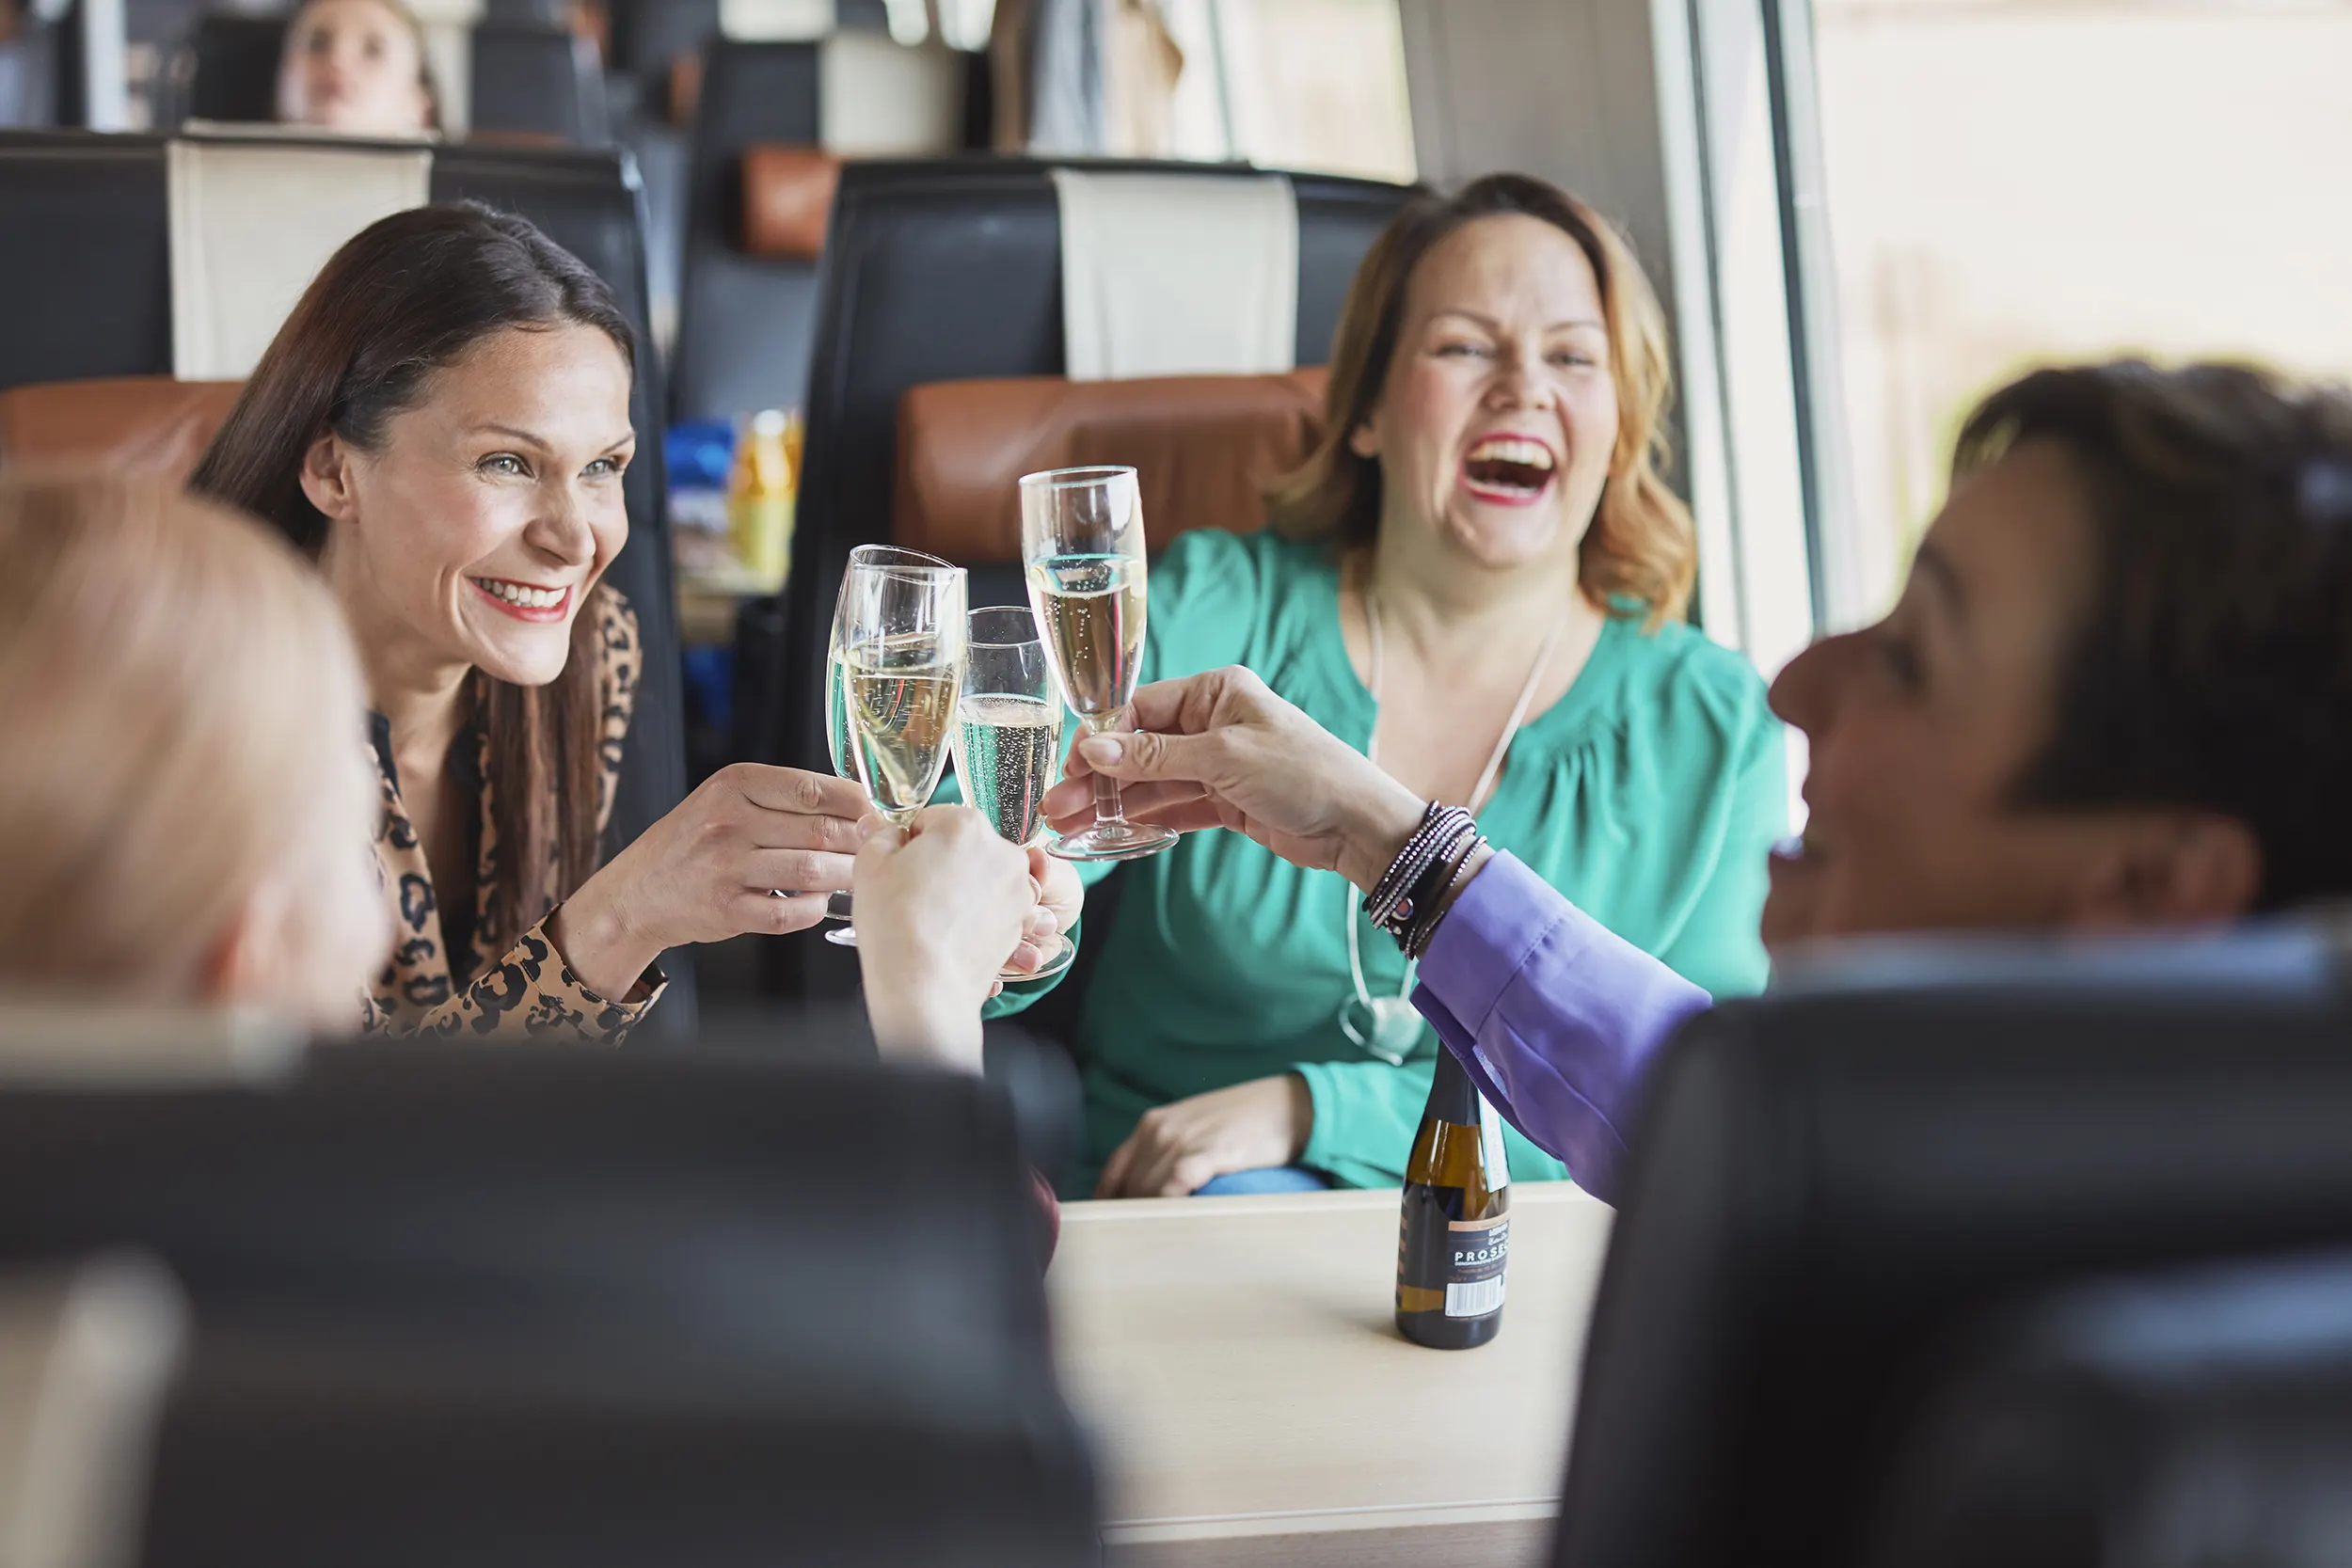 Enjoy your trip upstairs in the restaurant car where you can get food & drinks delivered to your seat.